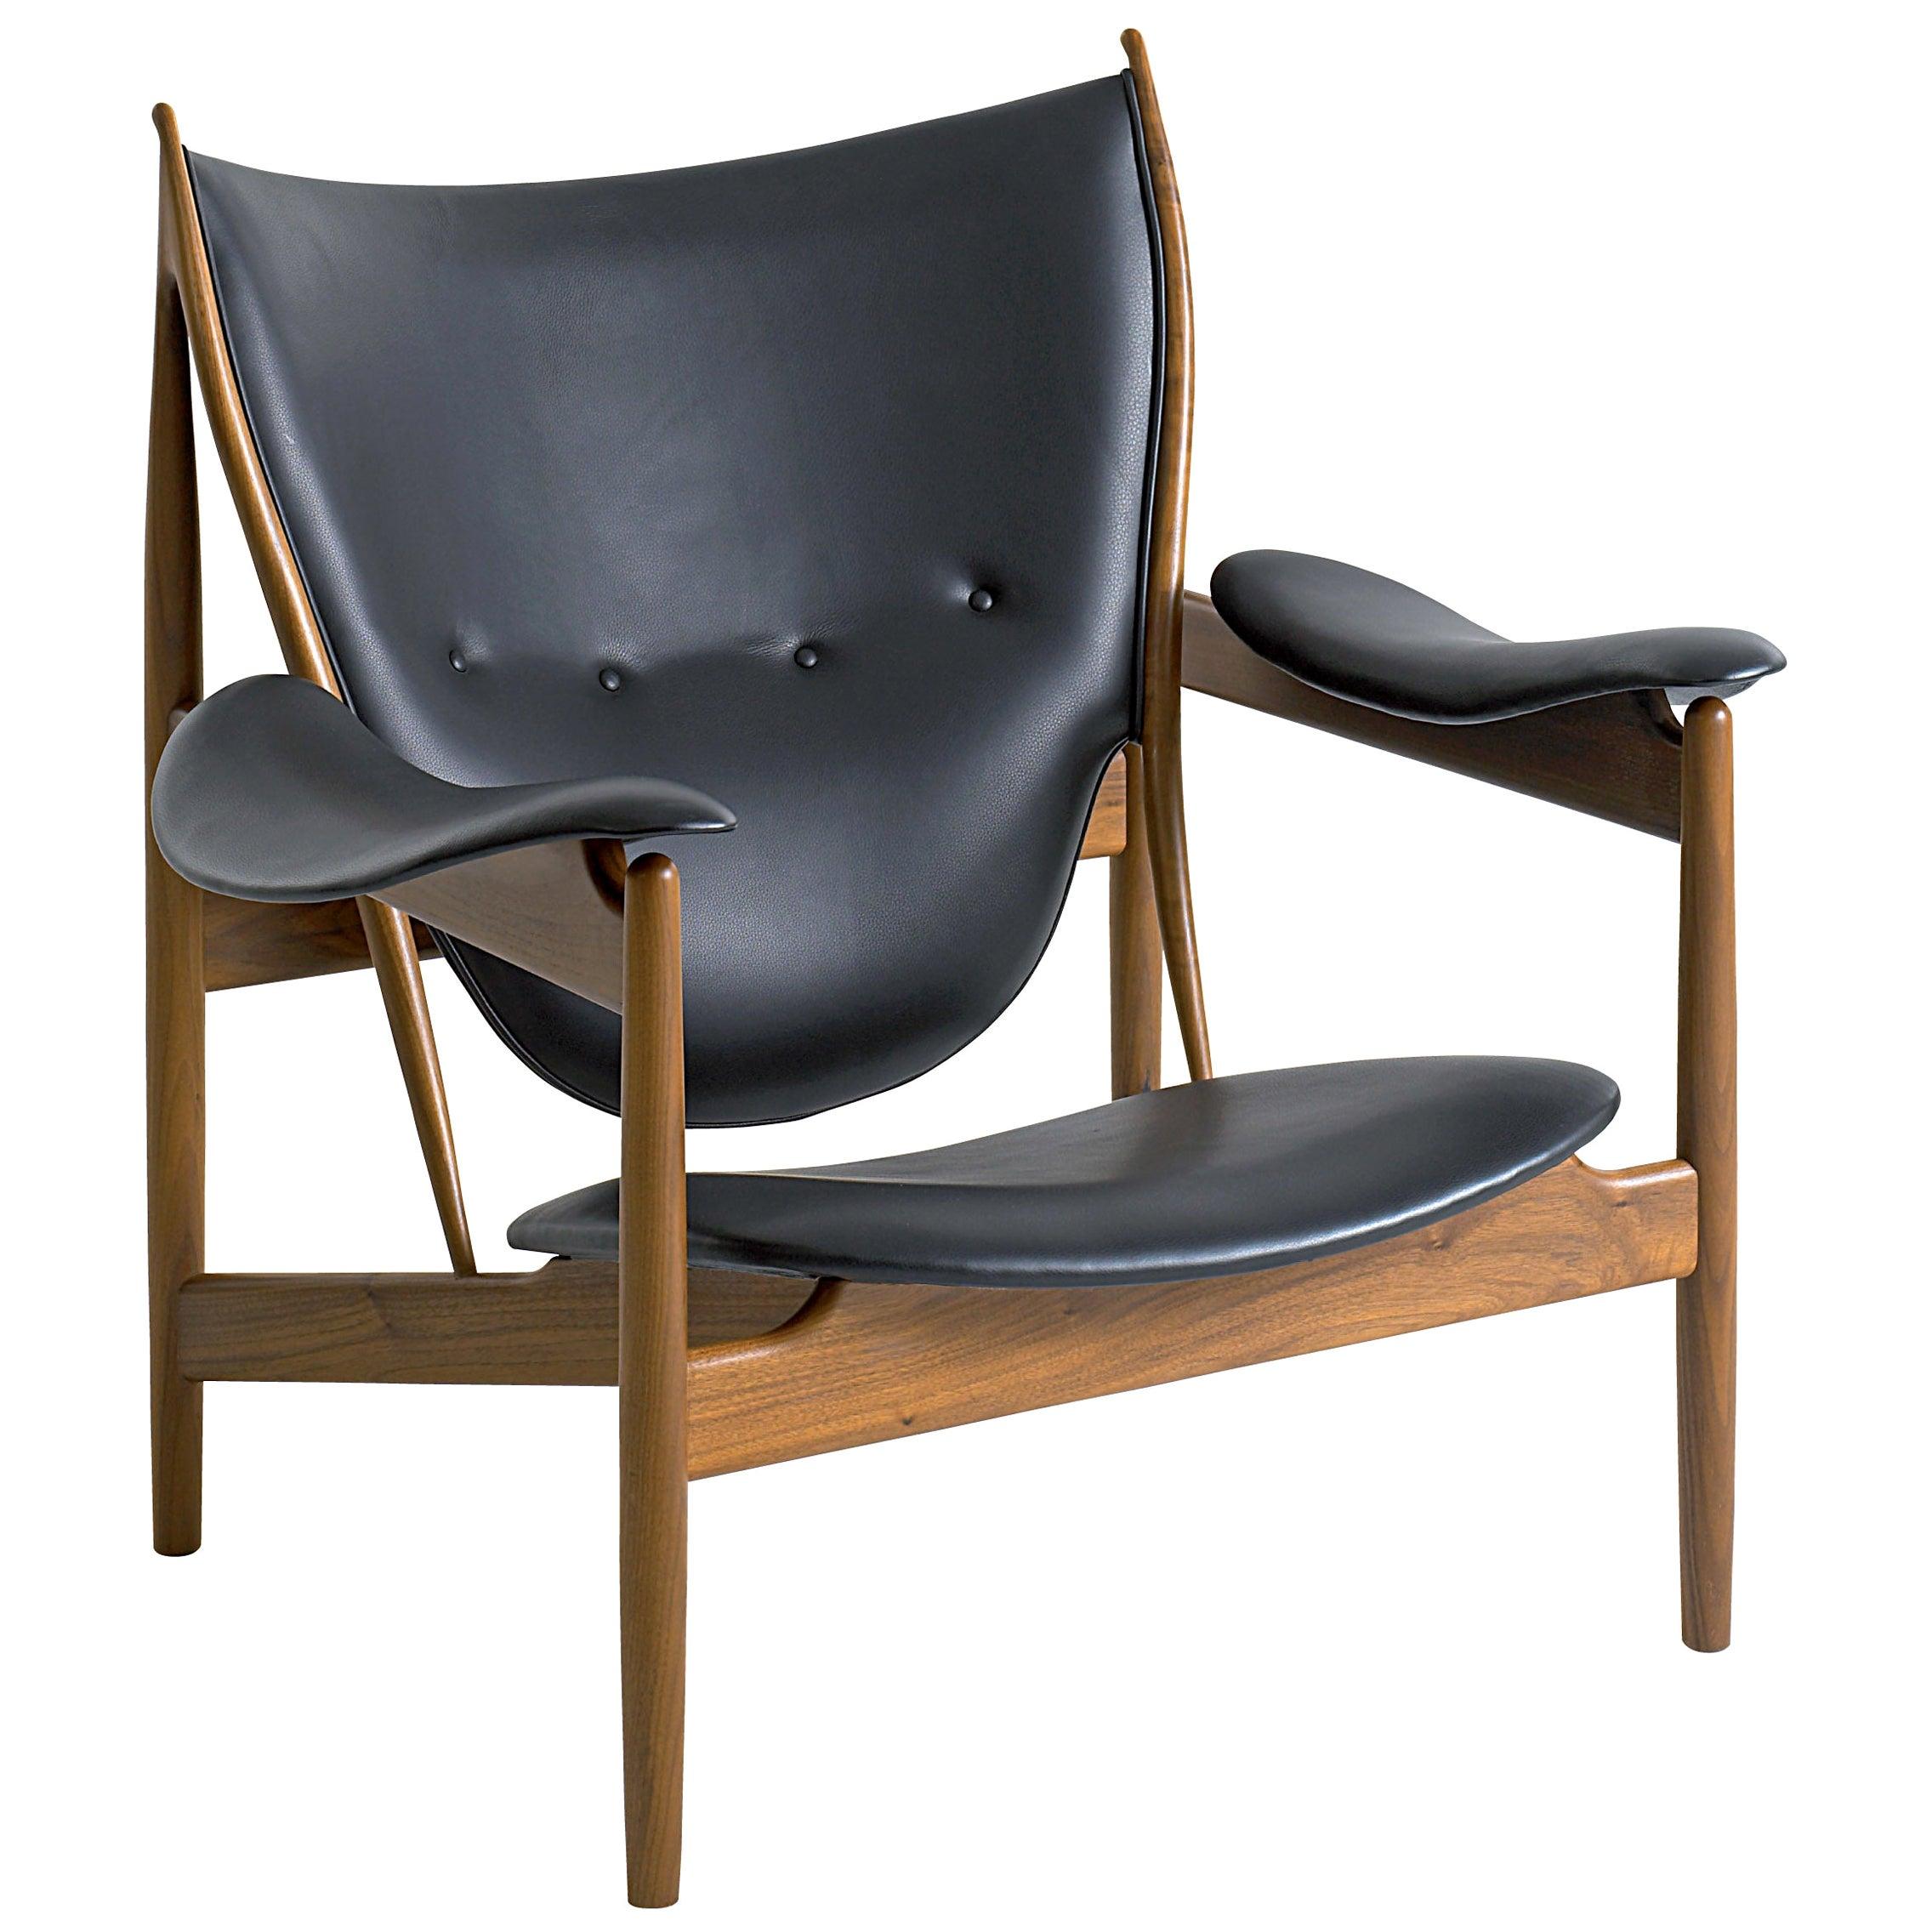 Danish Set of Chieftain Armchair and Chieftain Stool in Wood and Leather by Finn Juhl